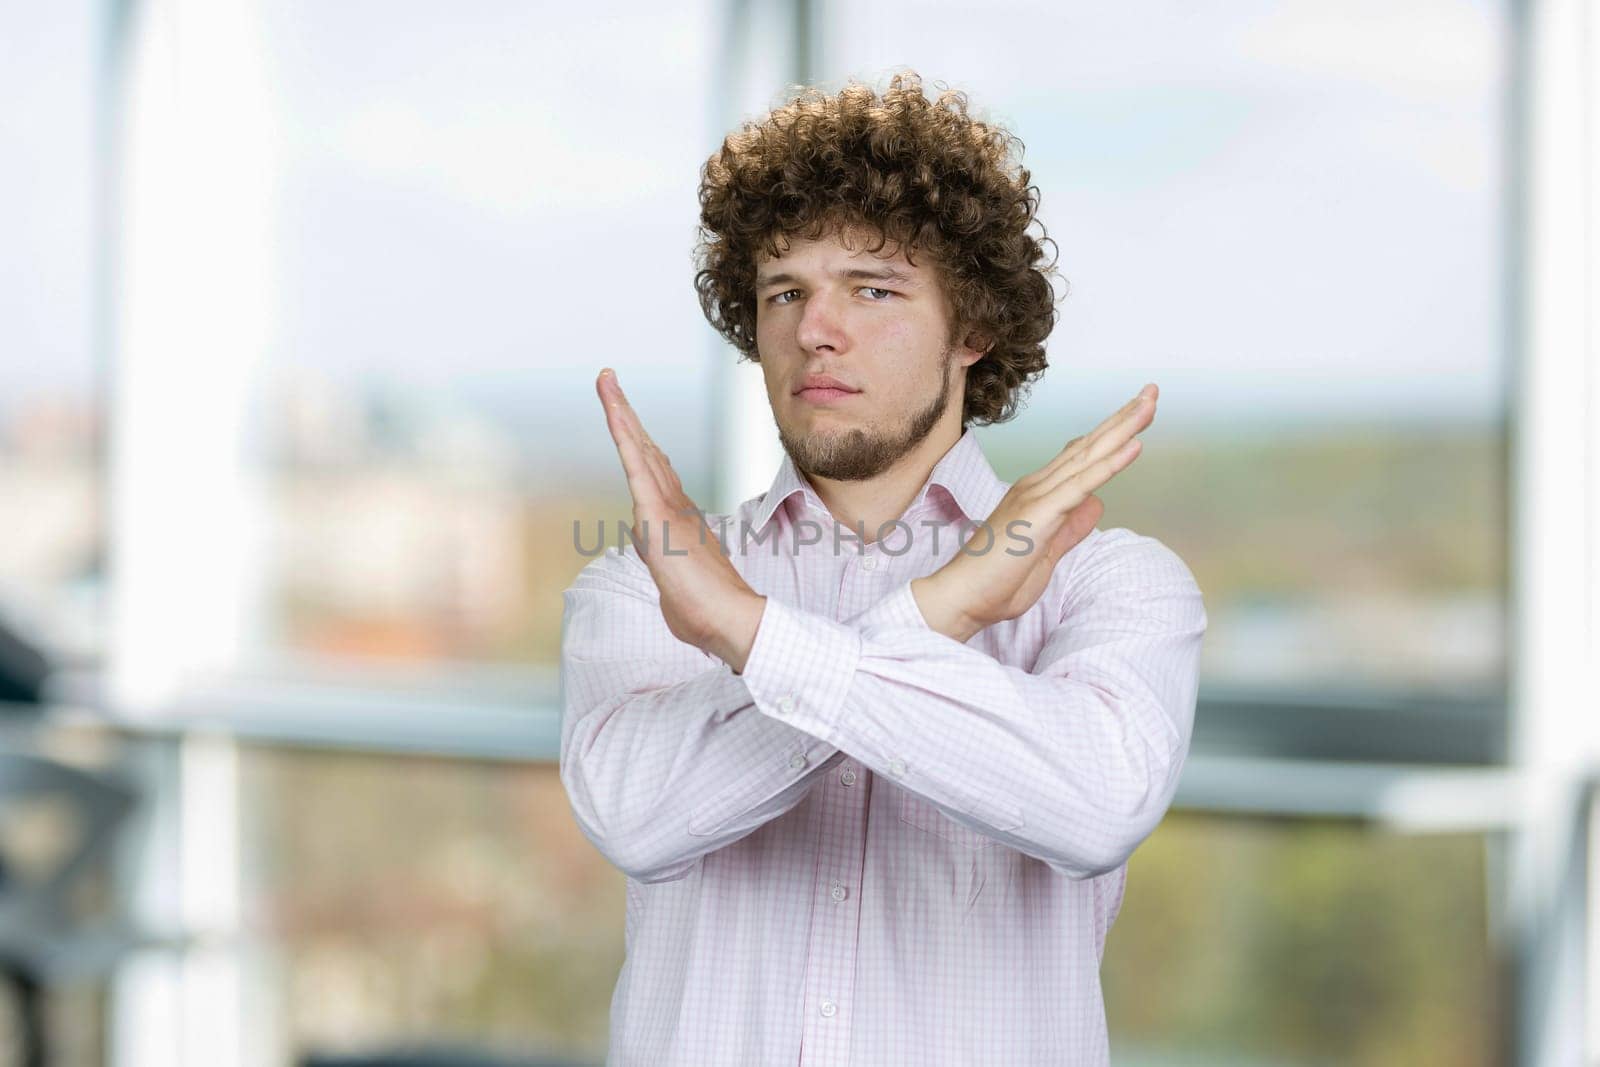 Portrait of a young man with curly hair cross his arms as sign of prohibition. Office window in the background.